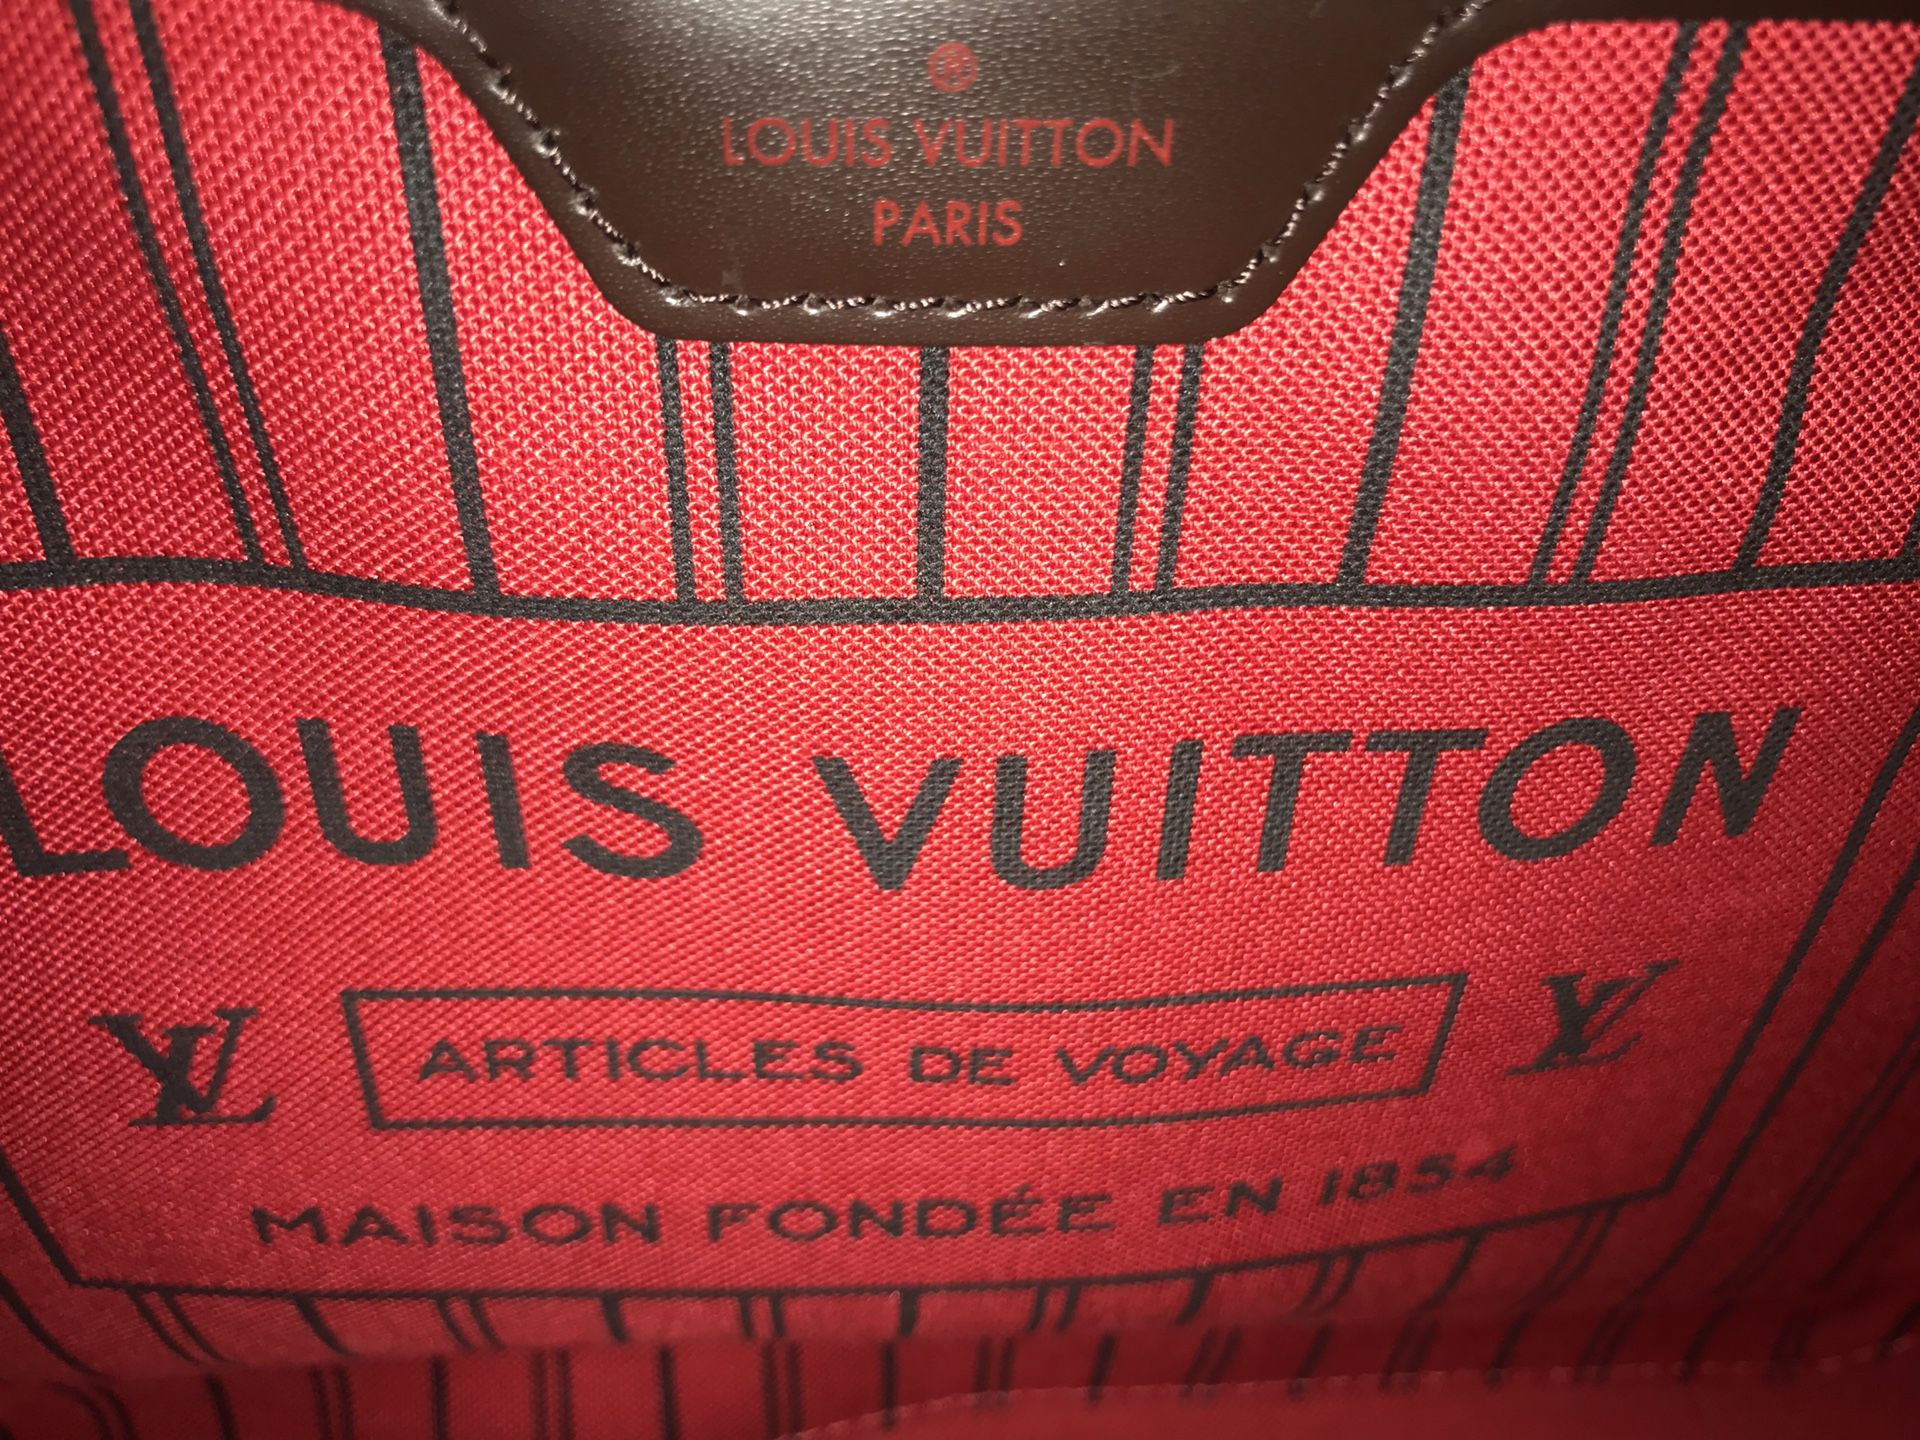 Louis Vuitton Neverfull MM (authentic) for Sale in Tacoma, WA